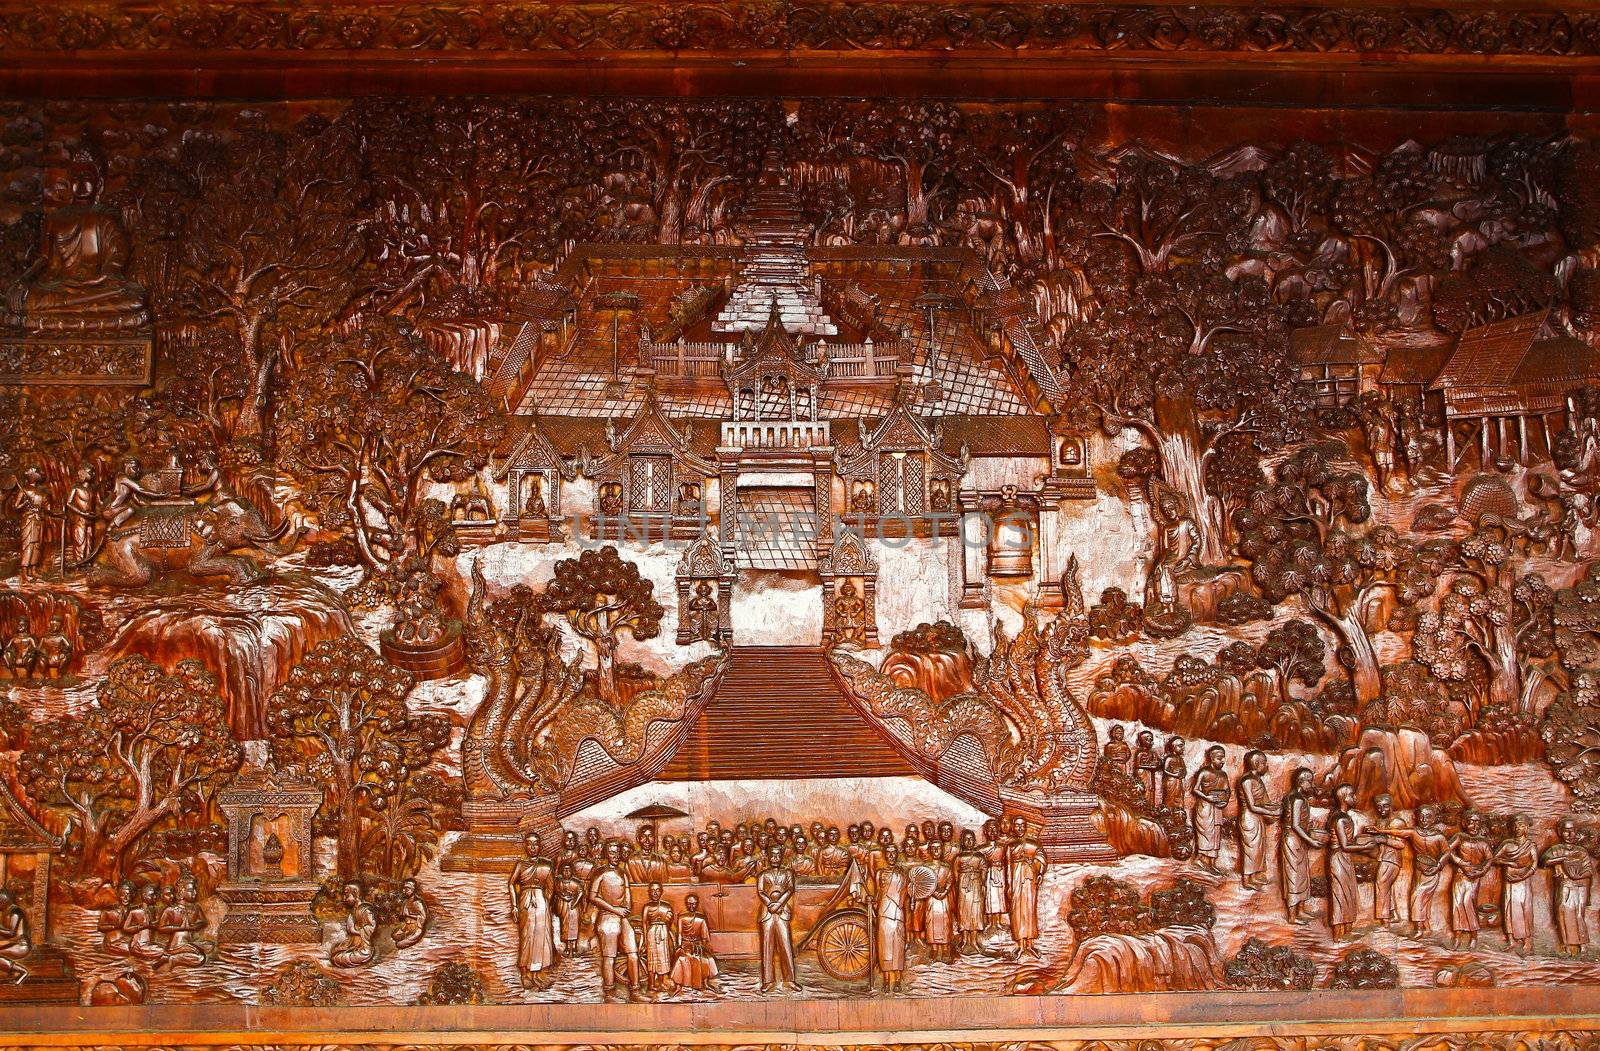 ancient mural wood carving from Thailand. by bajita111122